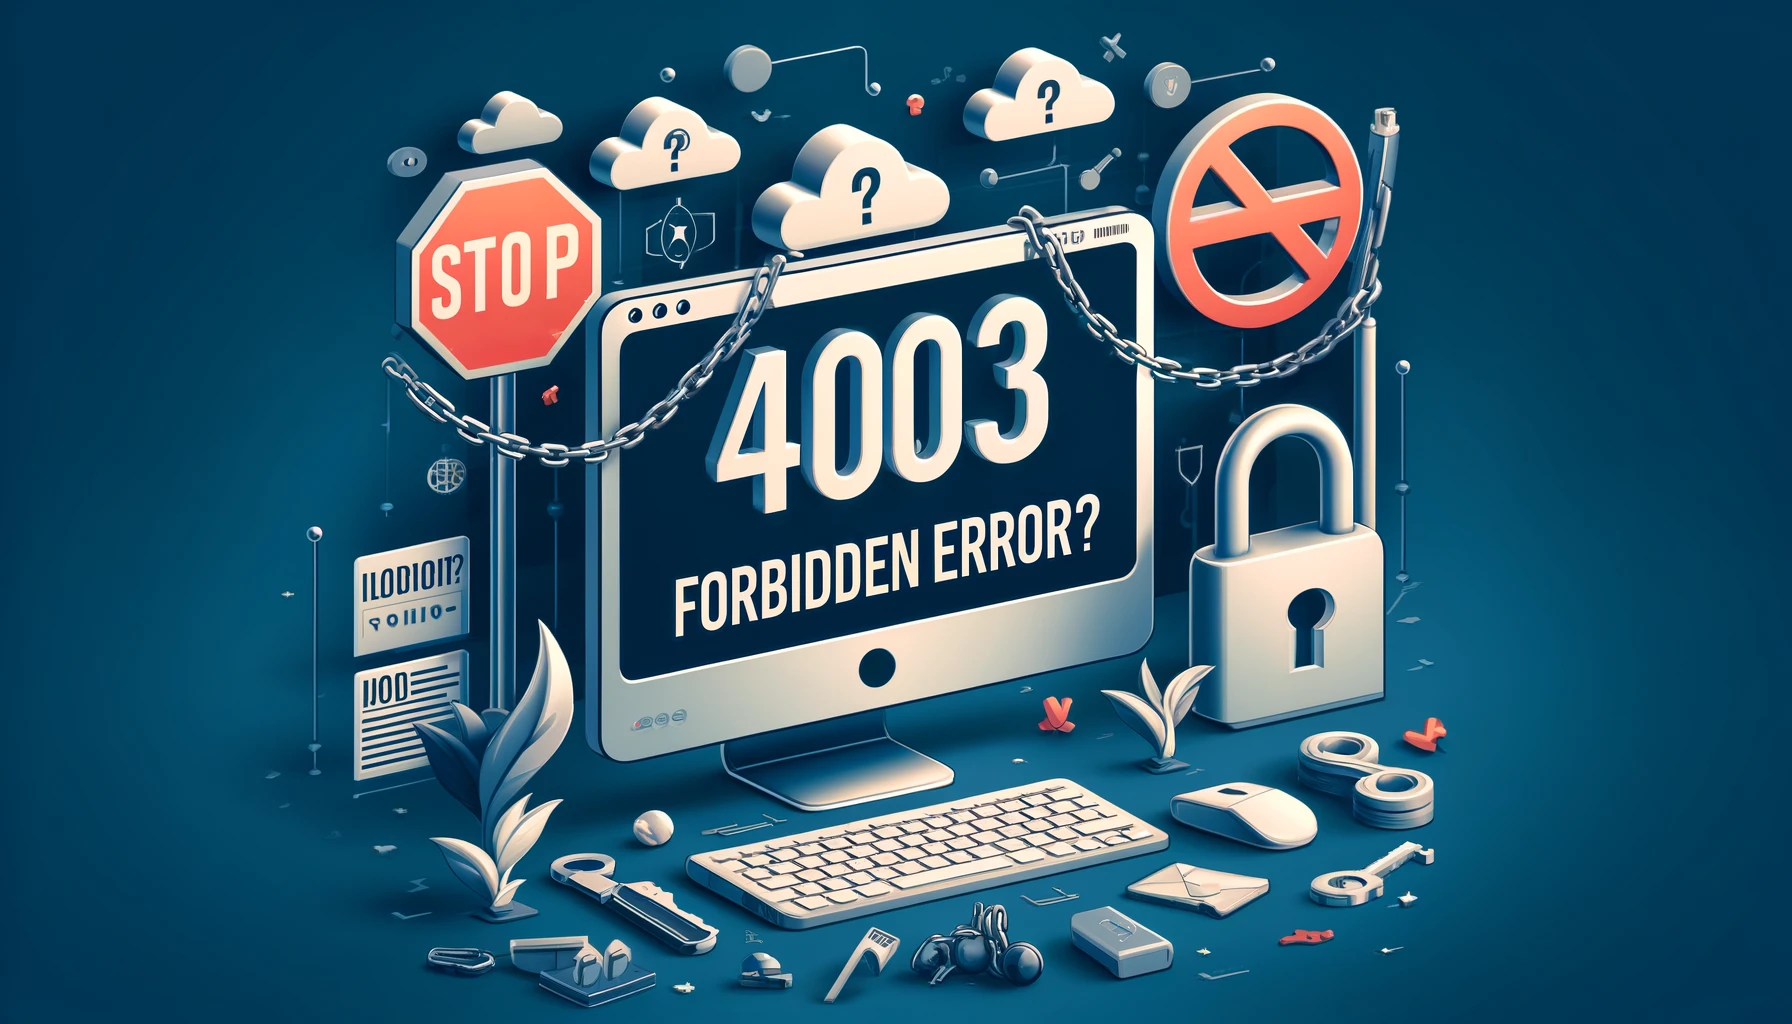 Getting ‘403 Forbidden Error’?? Try these 8 Solutions to Access your Website Again